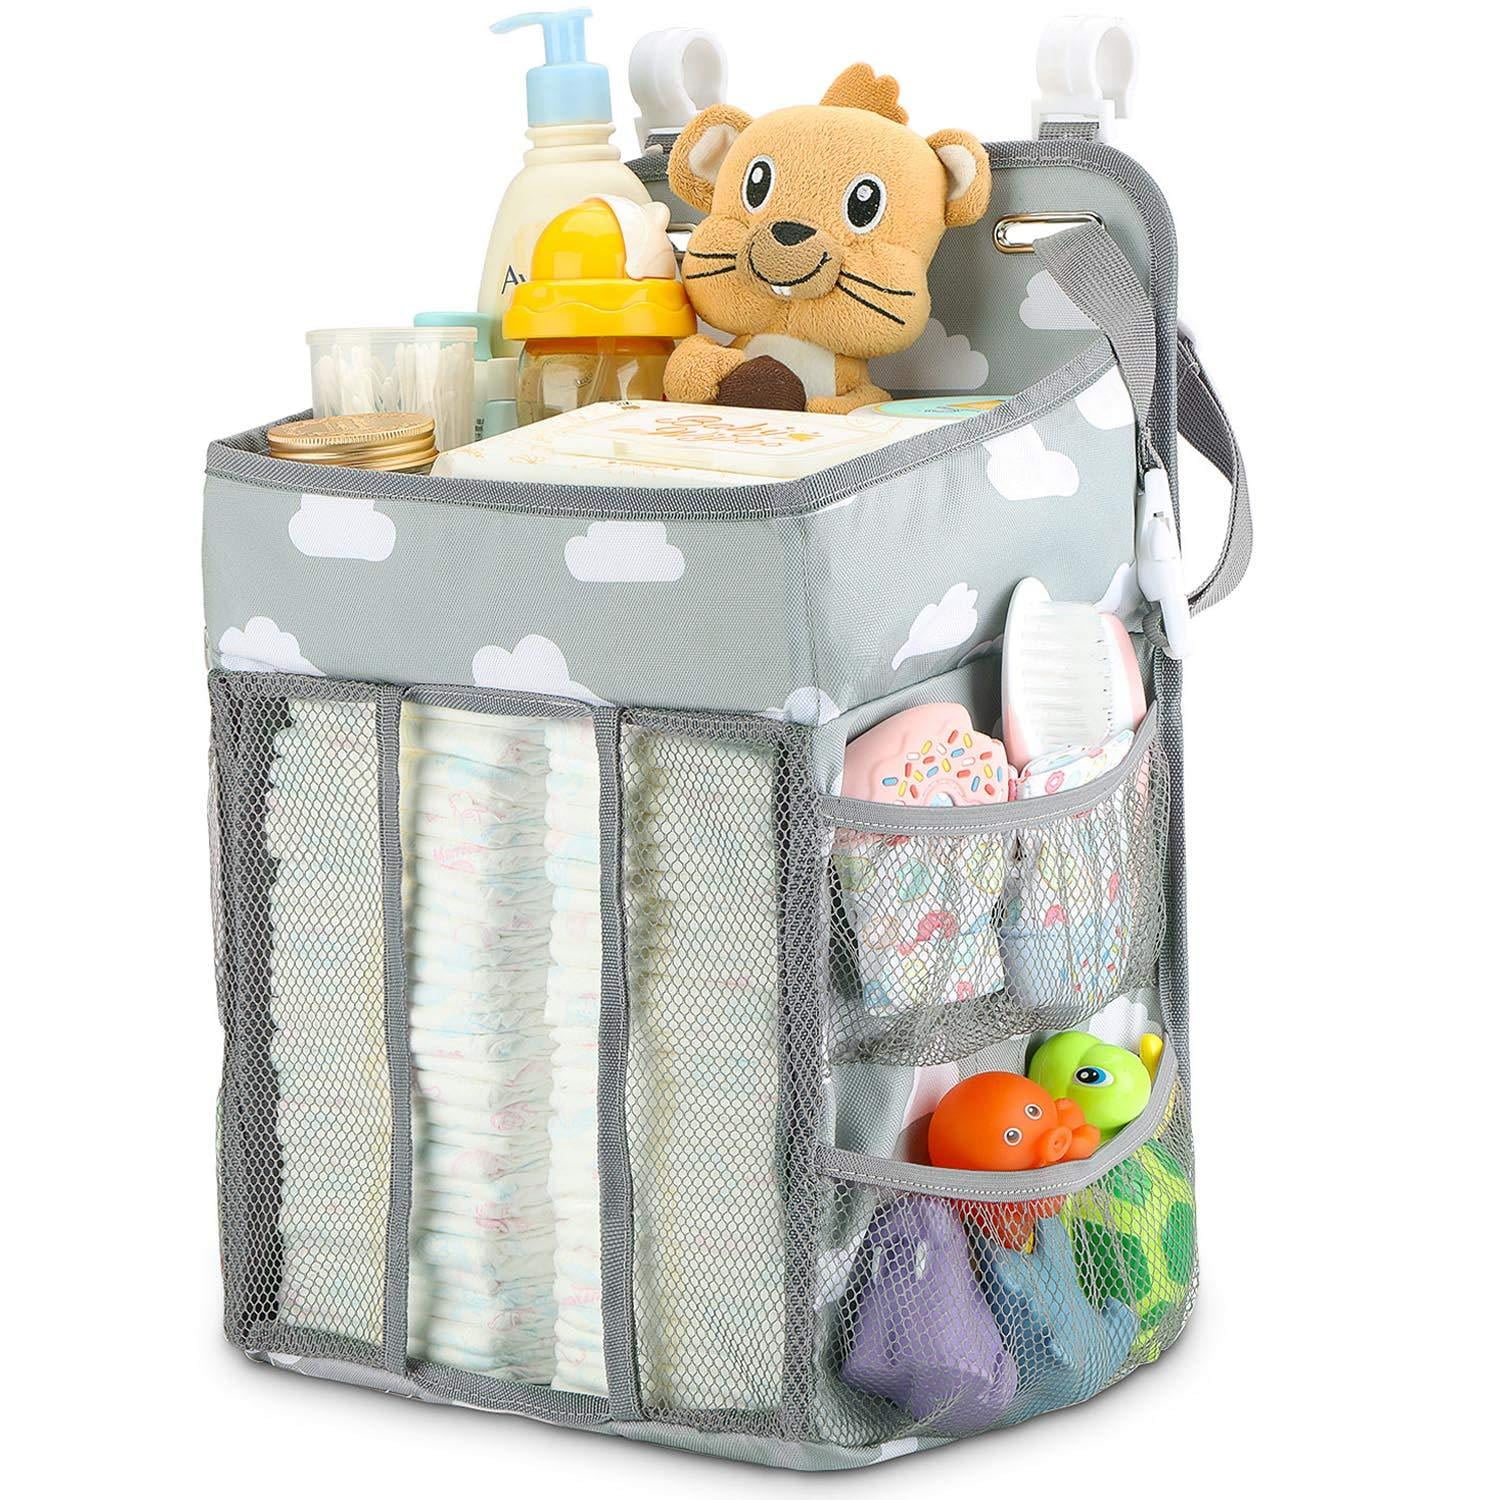 Nursery Storage for Changing Table Larger Size Baby Diaper Caddy Organizer Great Gift for Newborn Registry or Baby Shower Grey 